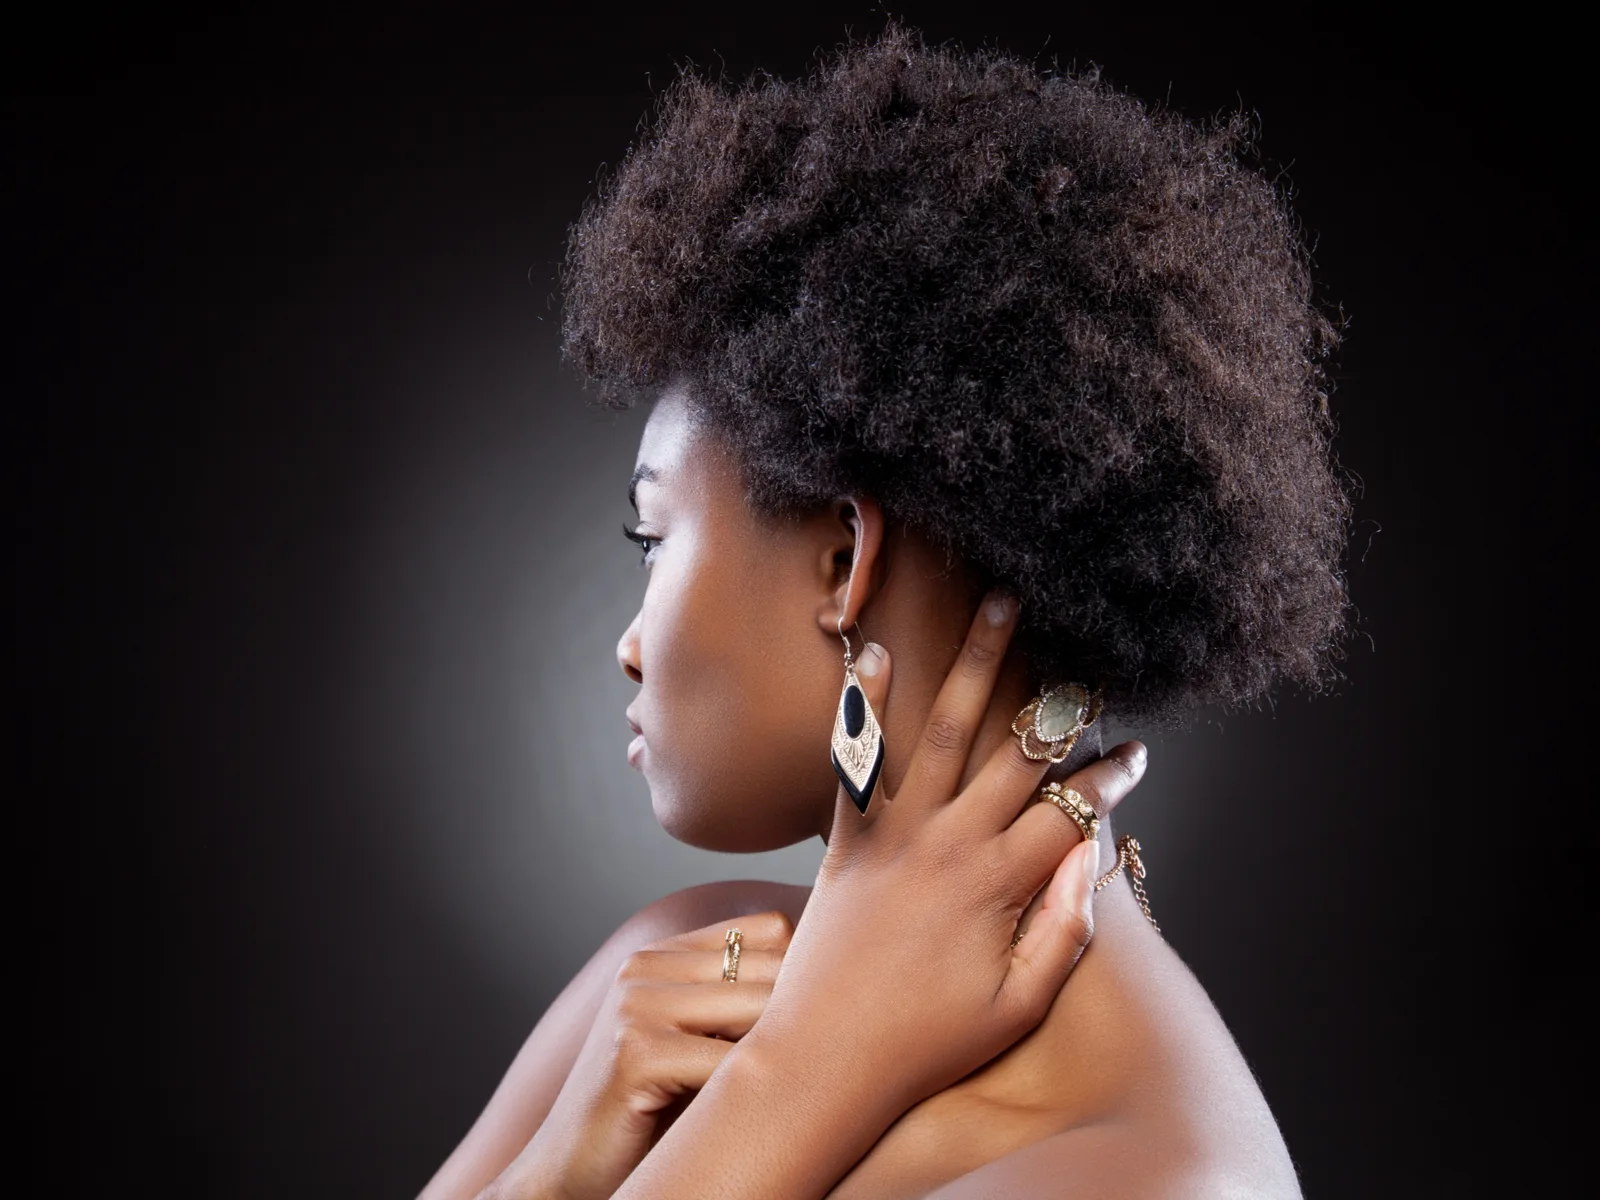 As an idea for short haircuts for black women, a young women wears the Tapered 4C Afro style